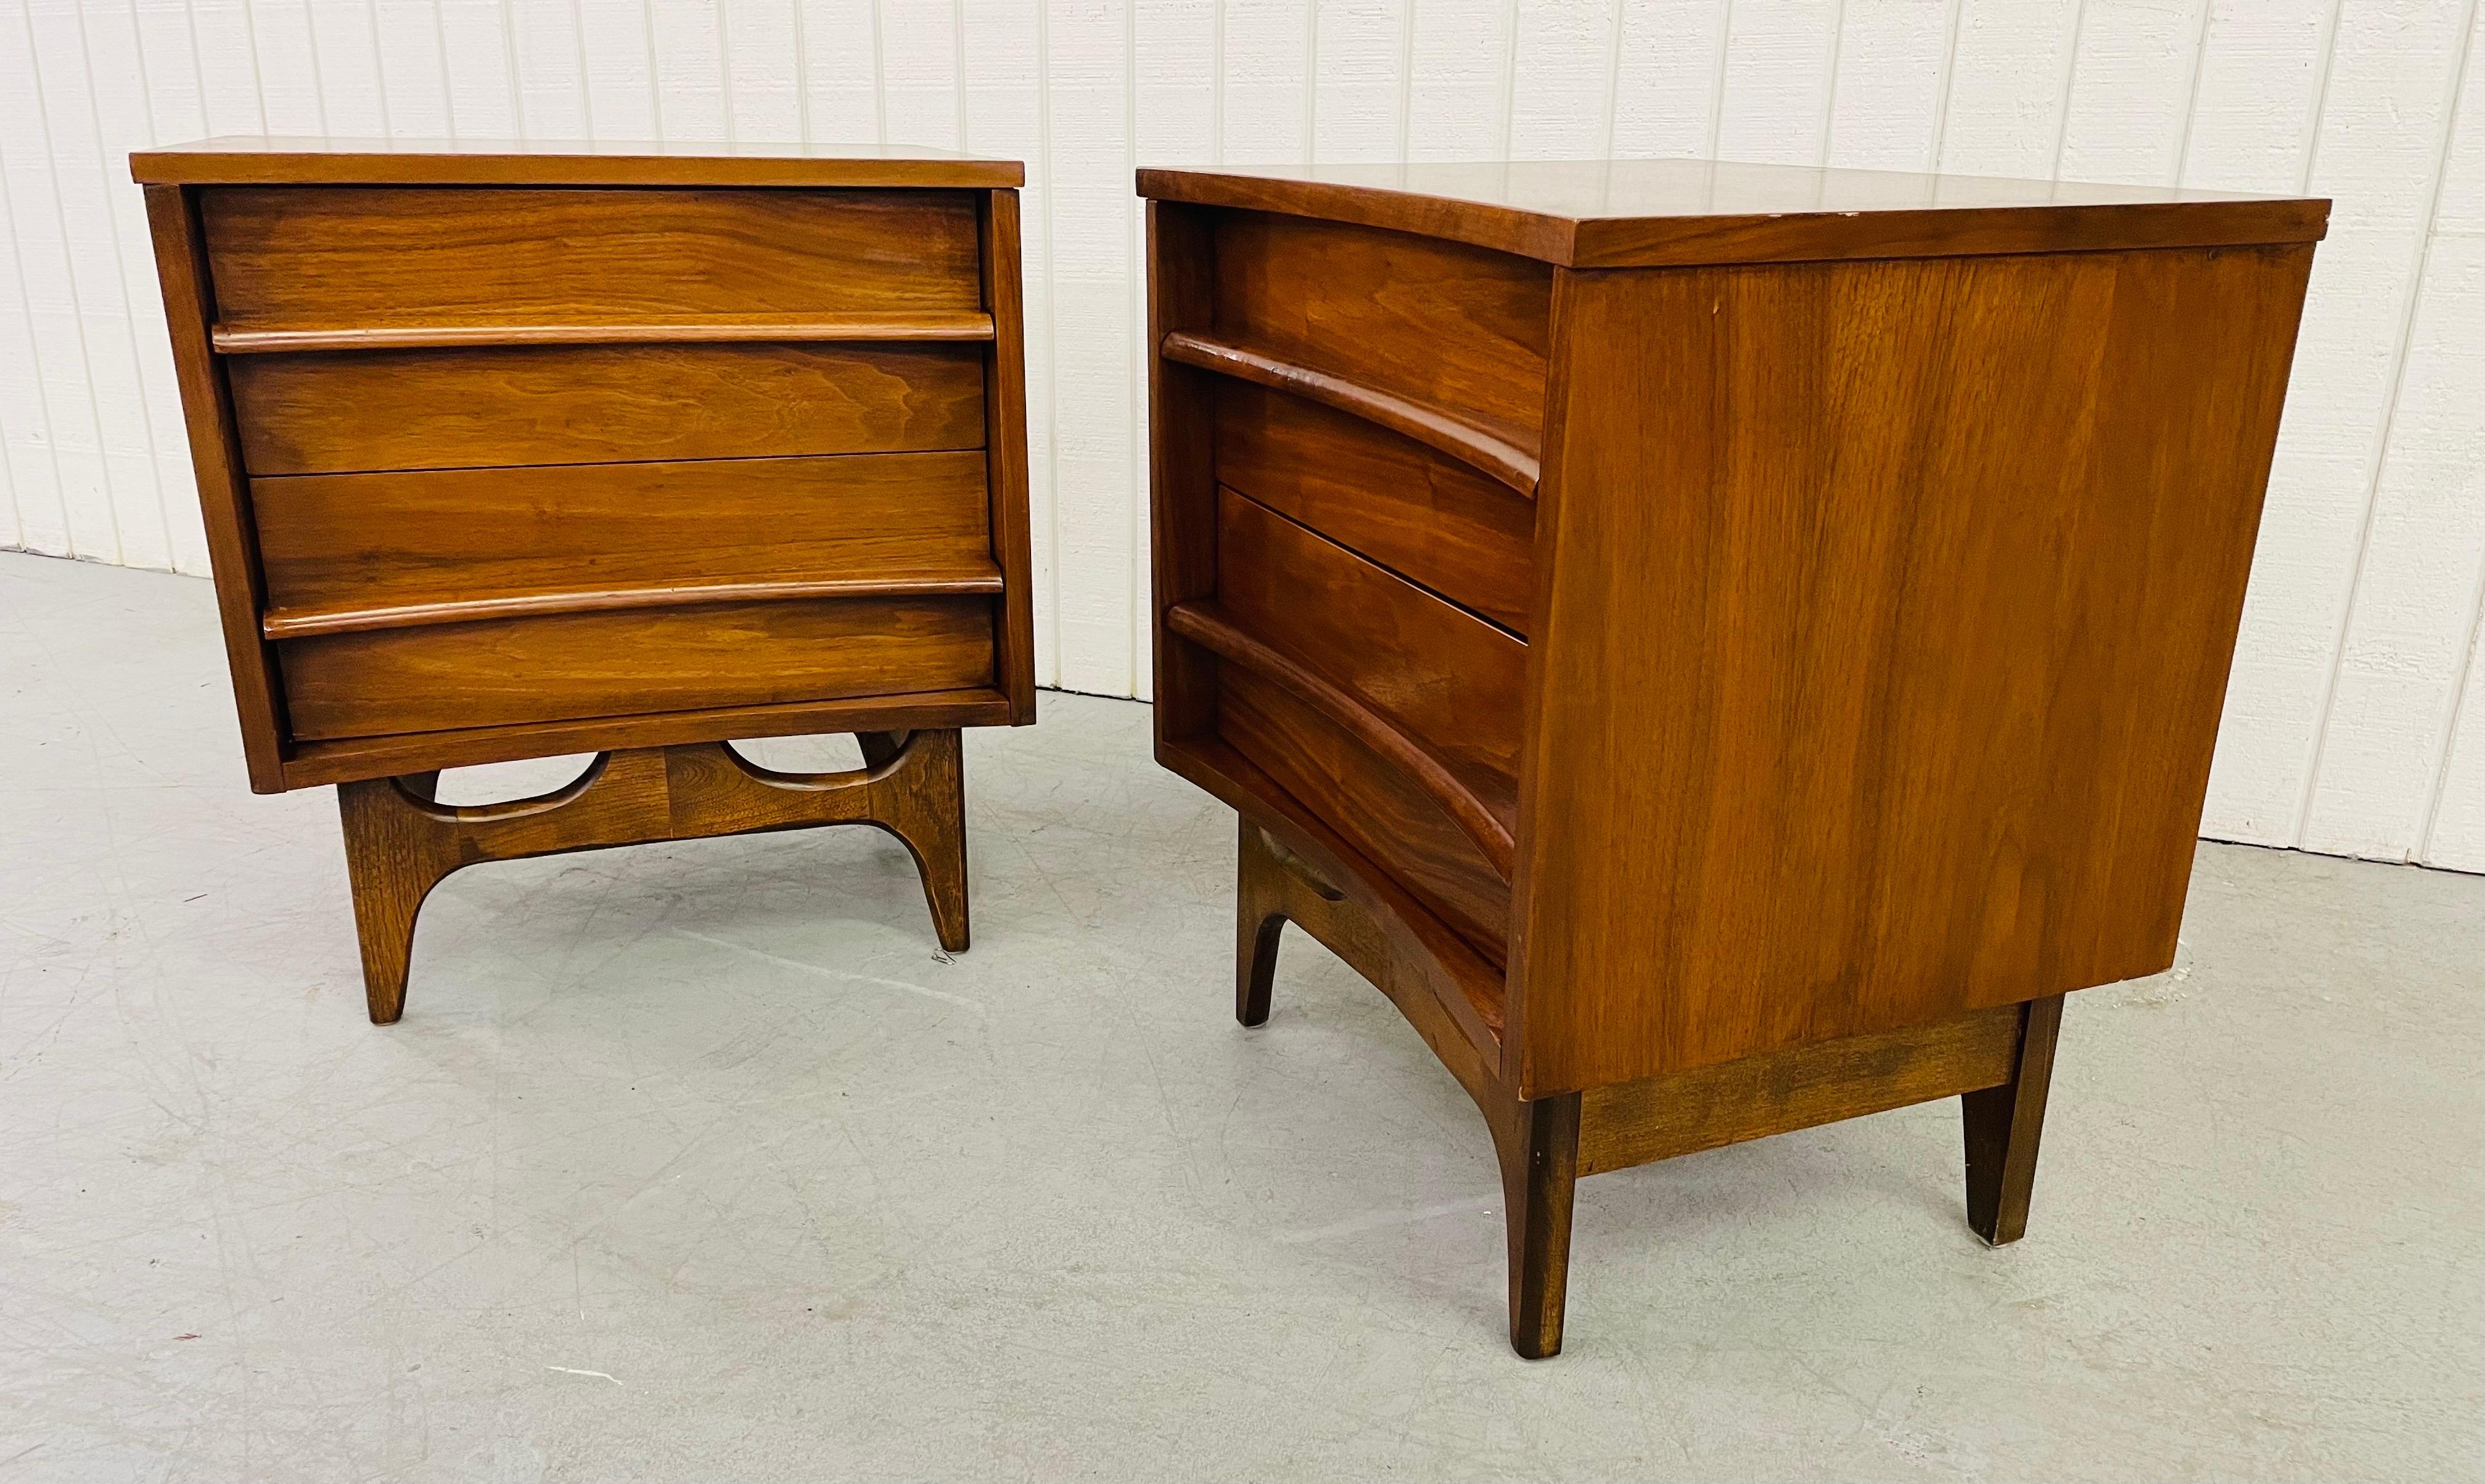 This listing is for a pair of mid-century young MFG walnut nightstands. Featuring a curved front, two drawers for storage with wood pulls, exceptionally designed legs, and beautiful walnut finish.